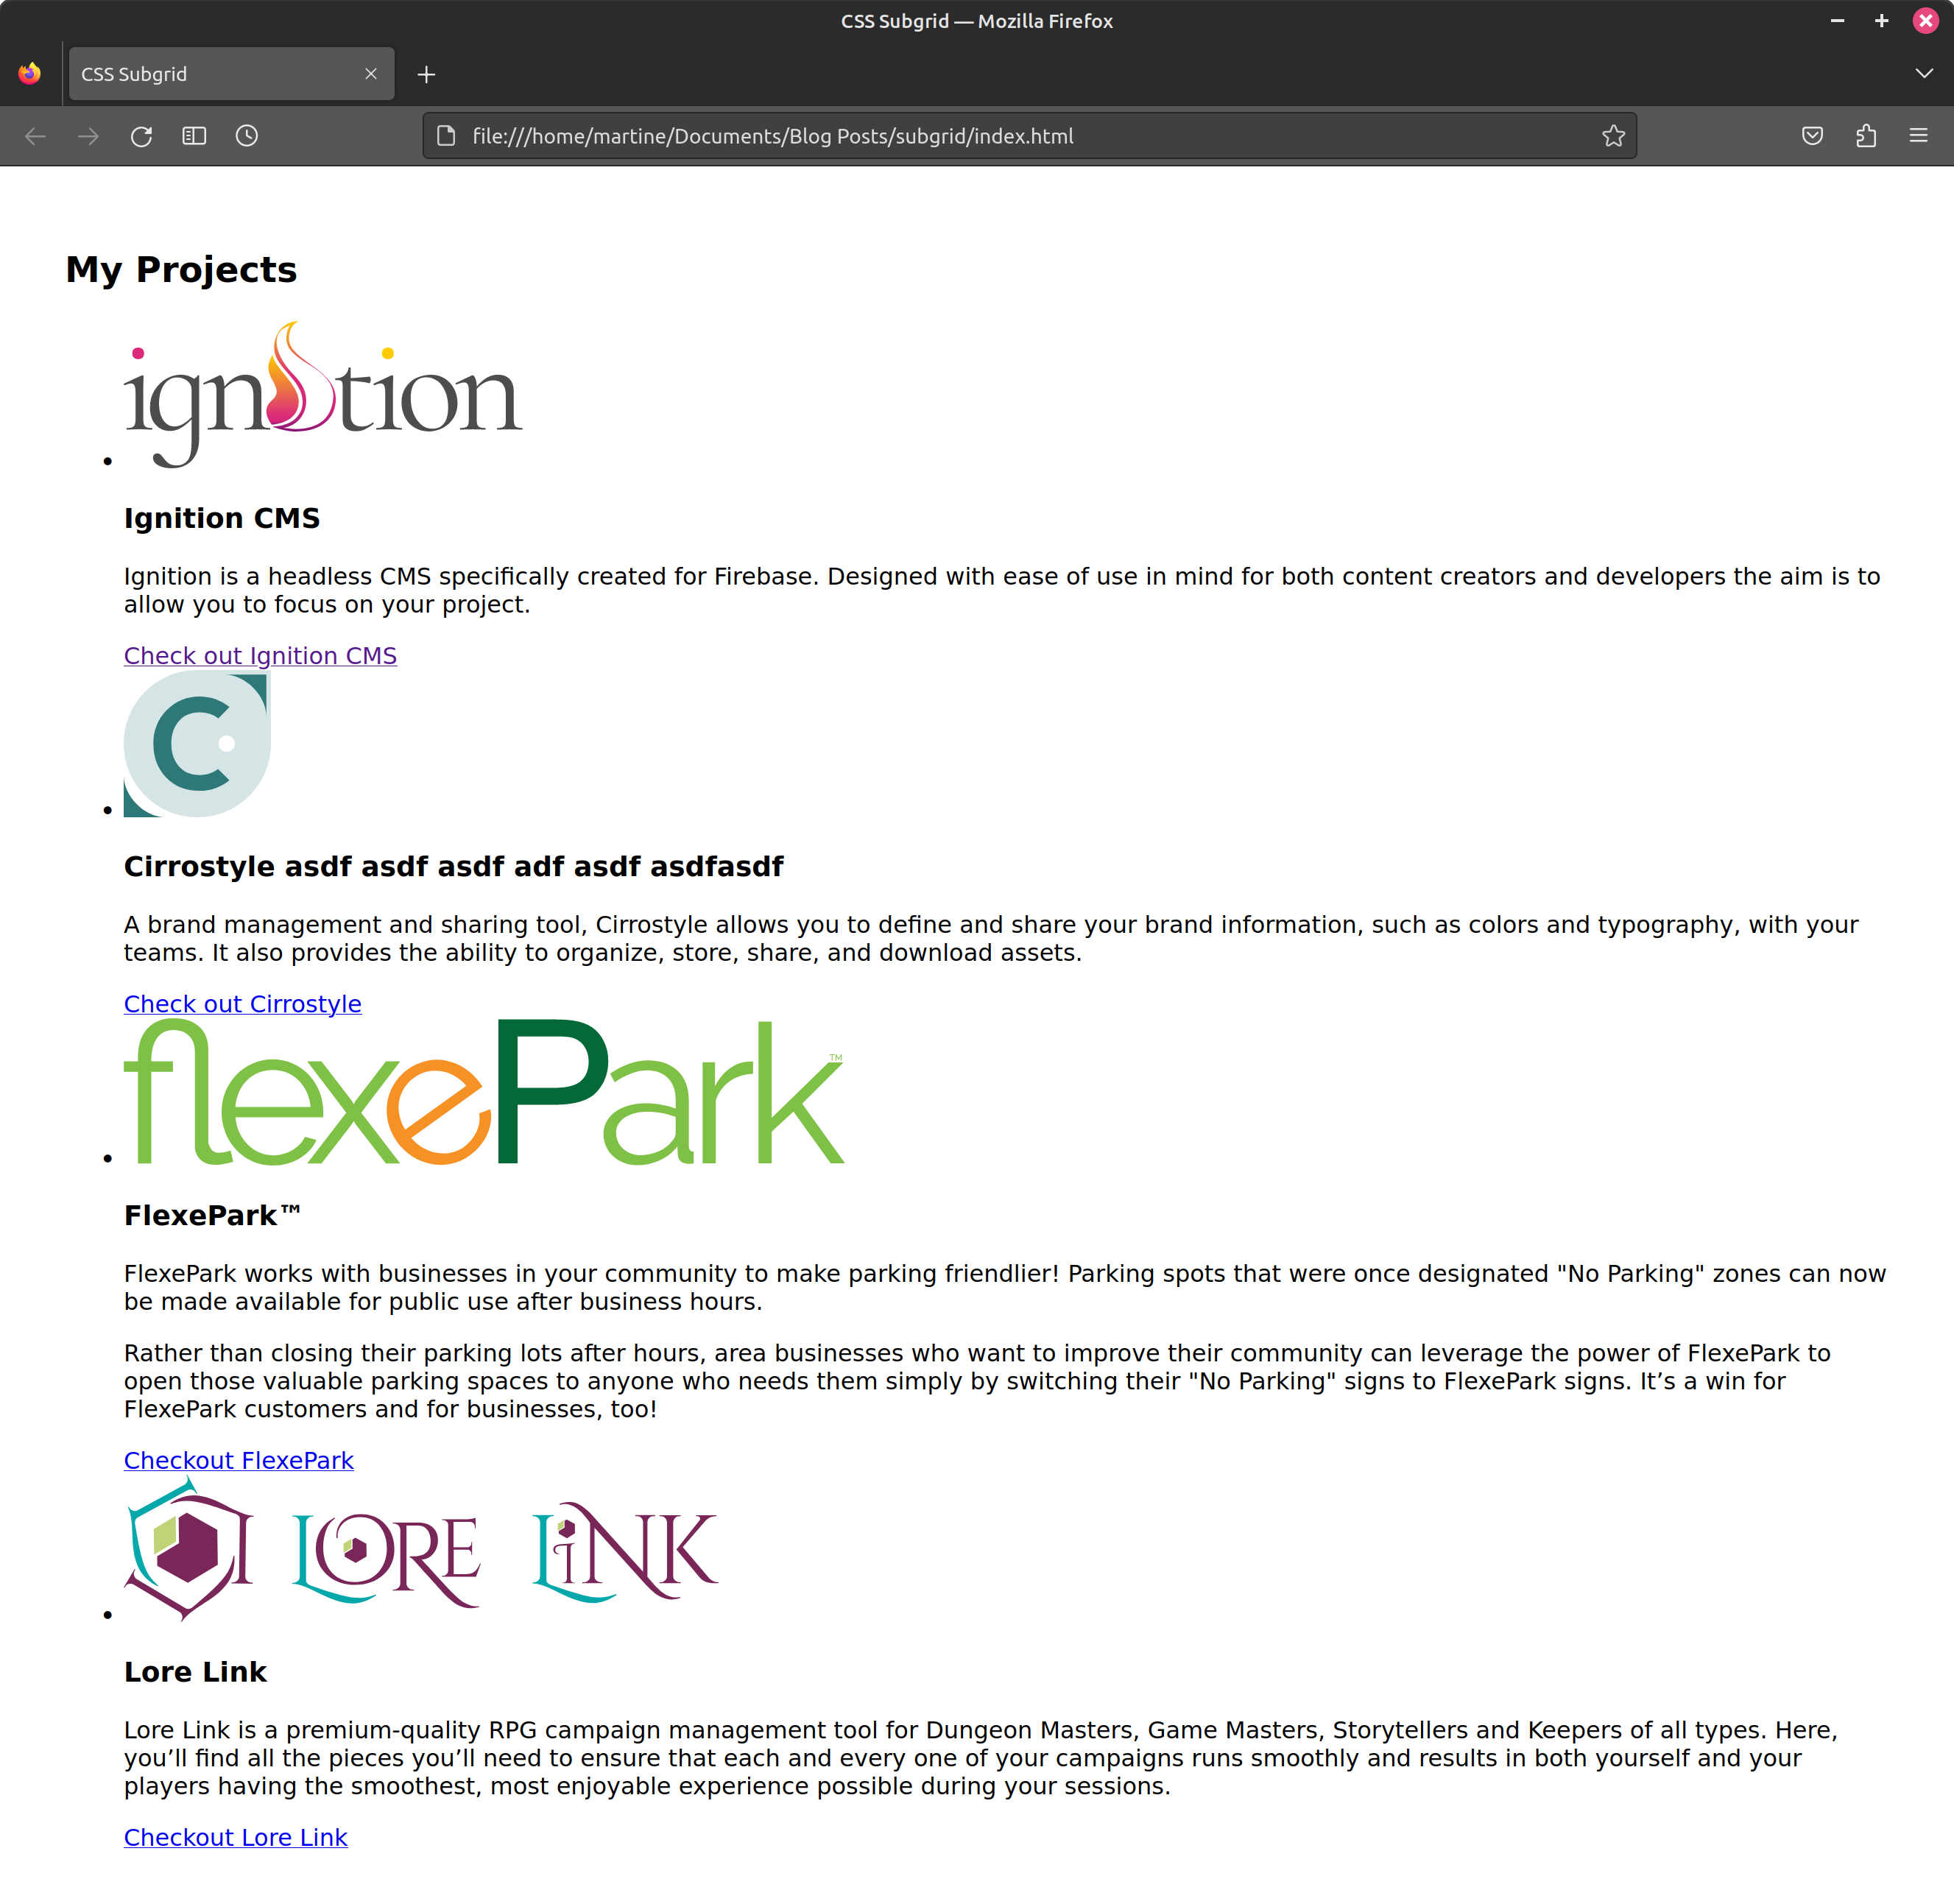 screen capture of starting point in Firefox browser